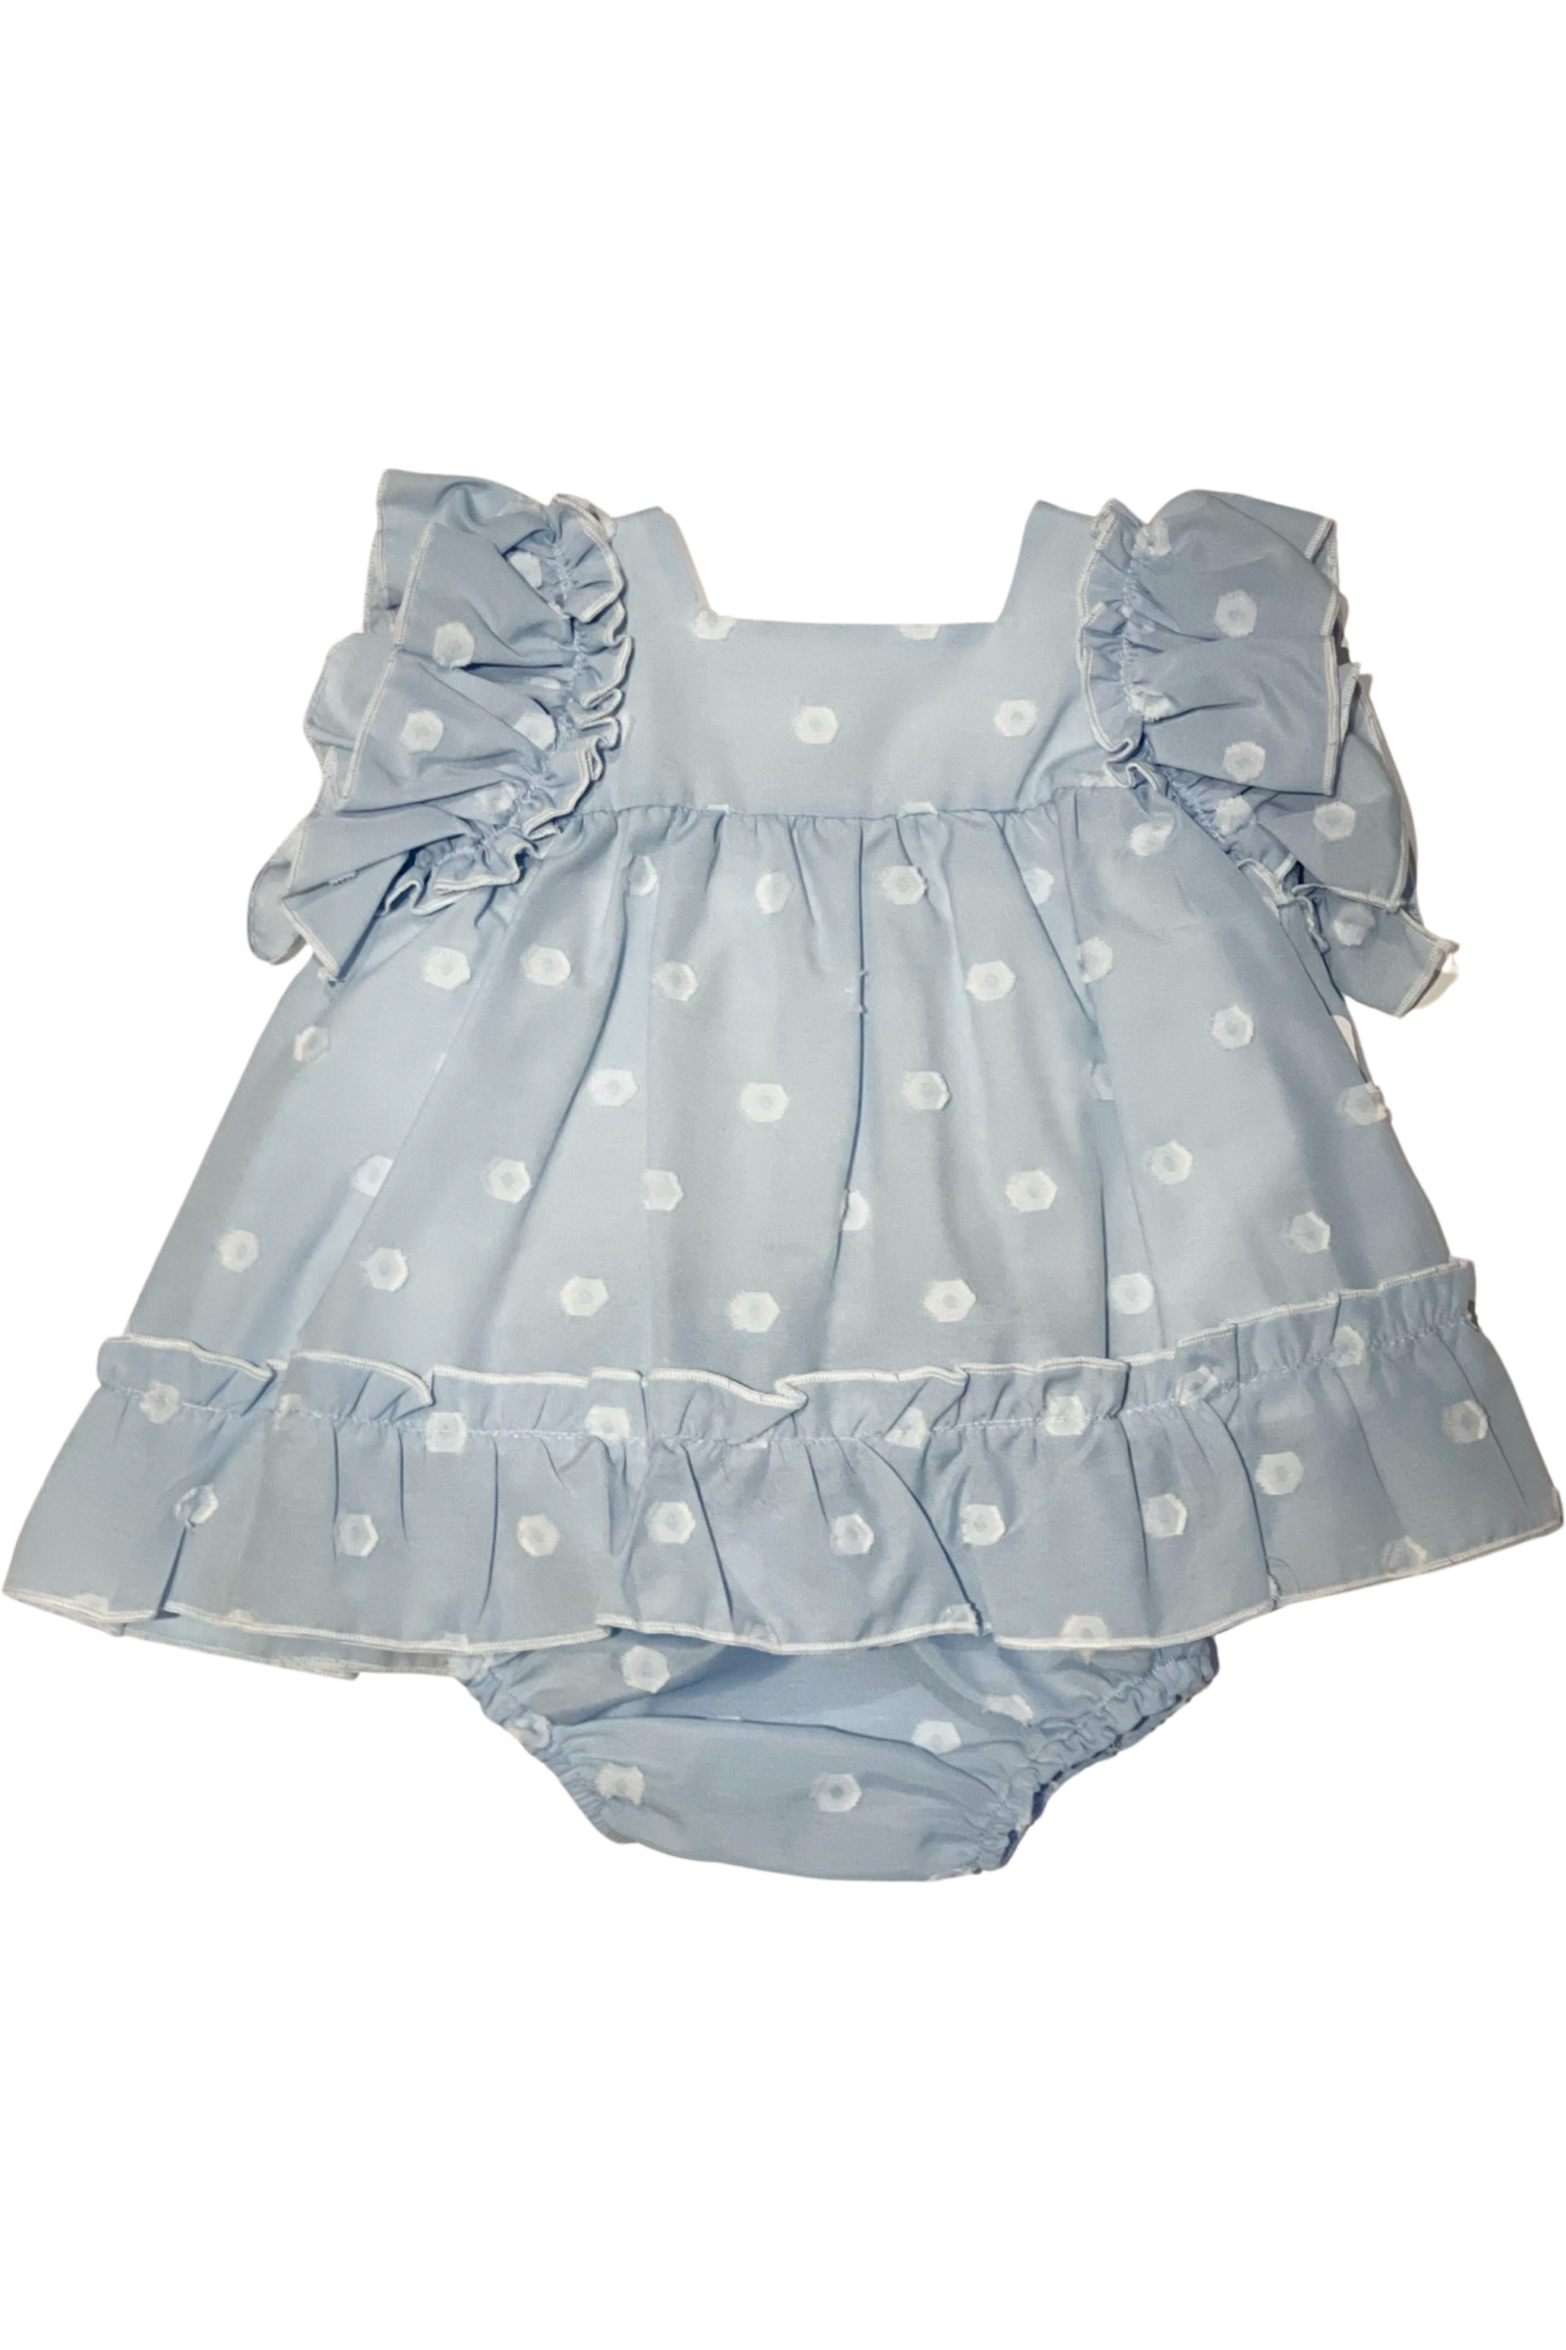 SS24 Lor Miral Baby Girls Blue Dot Dress & Knickers Dainty Delilah